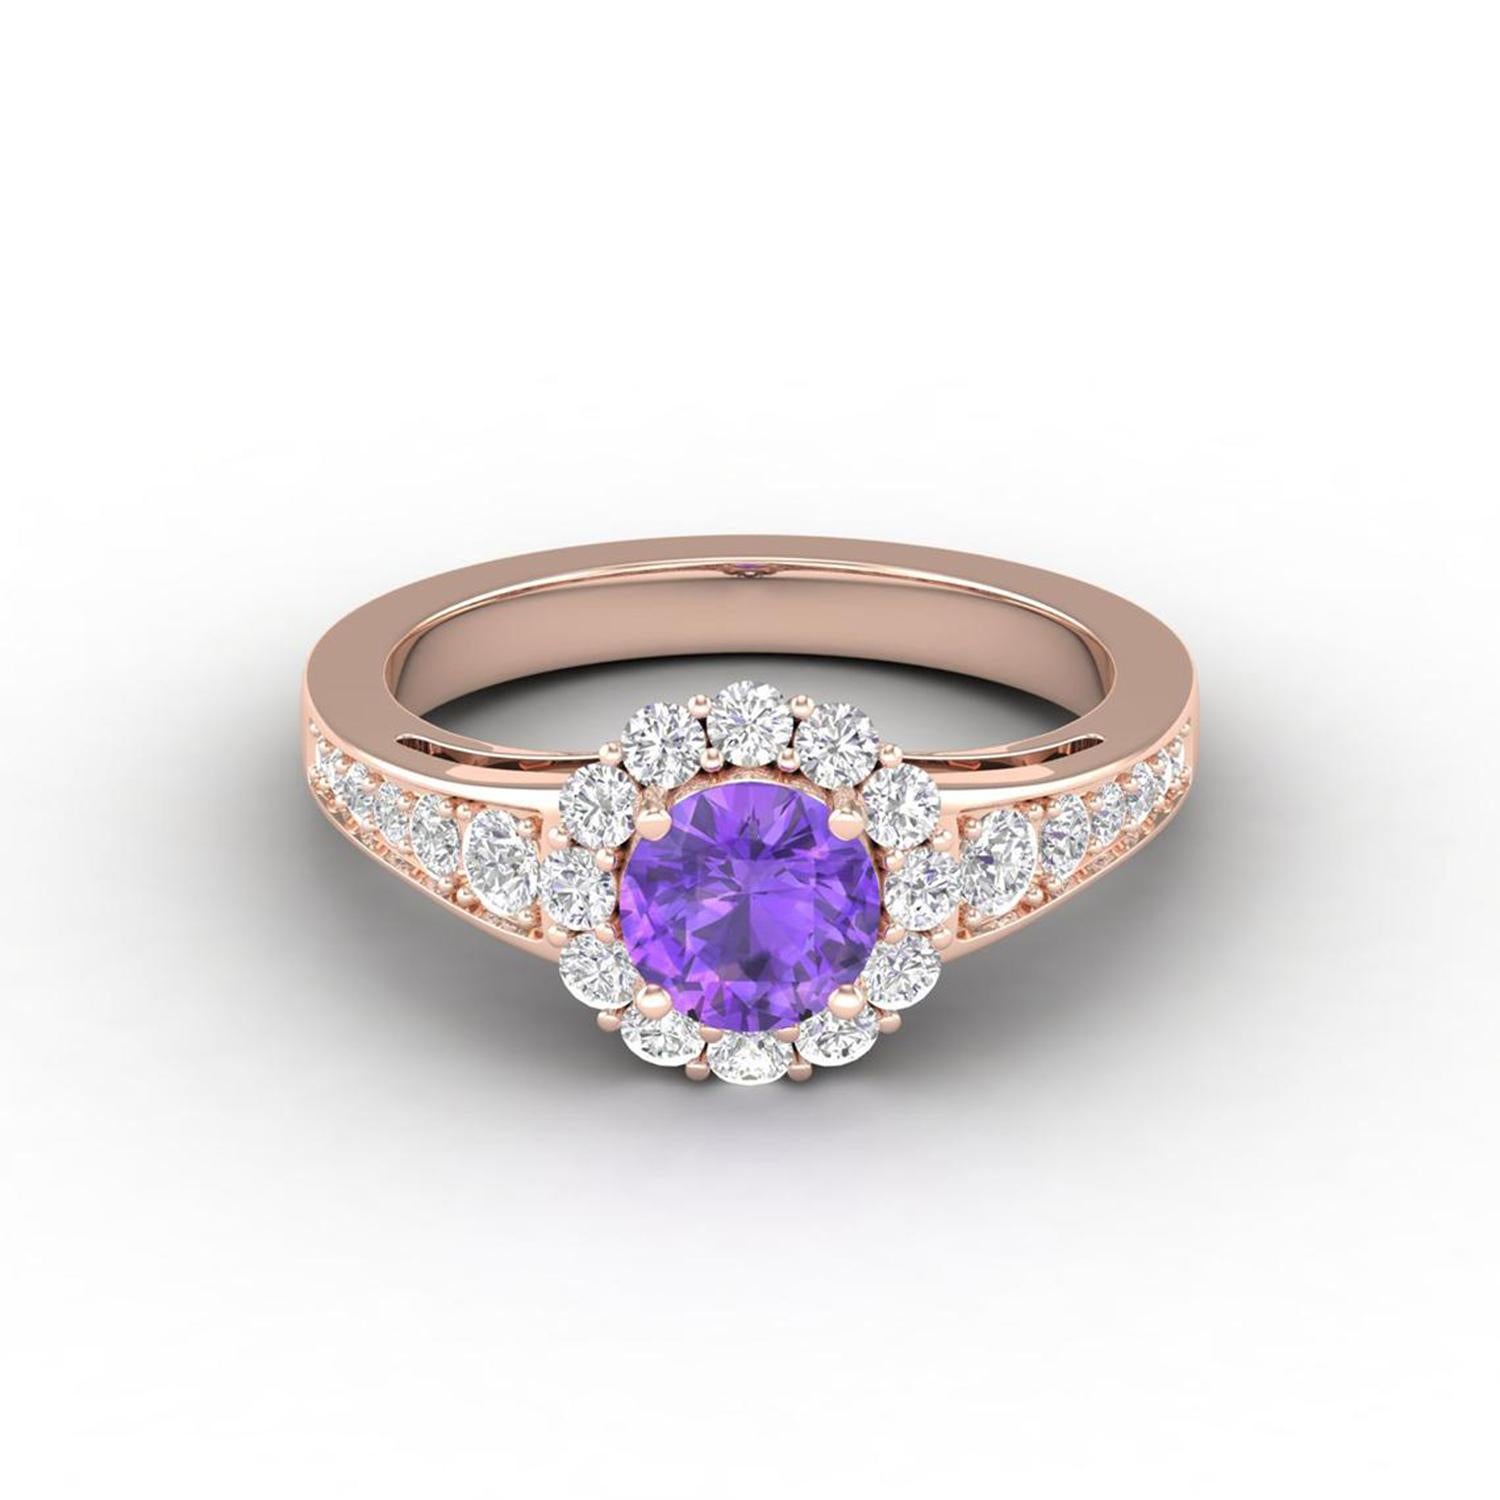 14 Karat Gold Round Amethyst Ring / Round Diamond Ring / Solitaire Ring For Sale 1